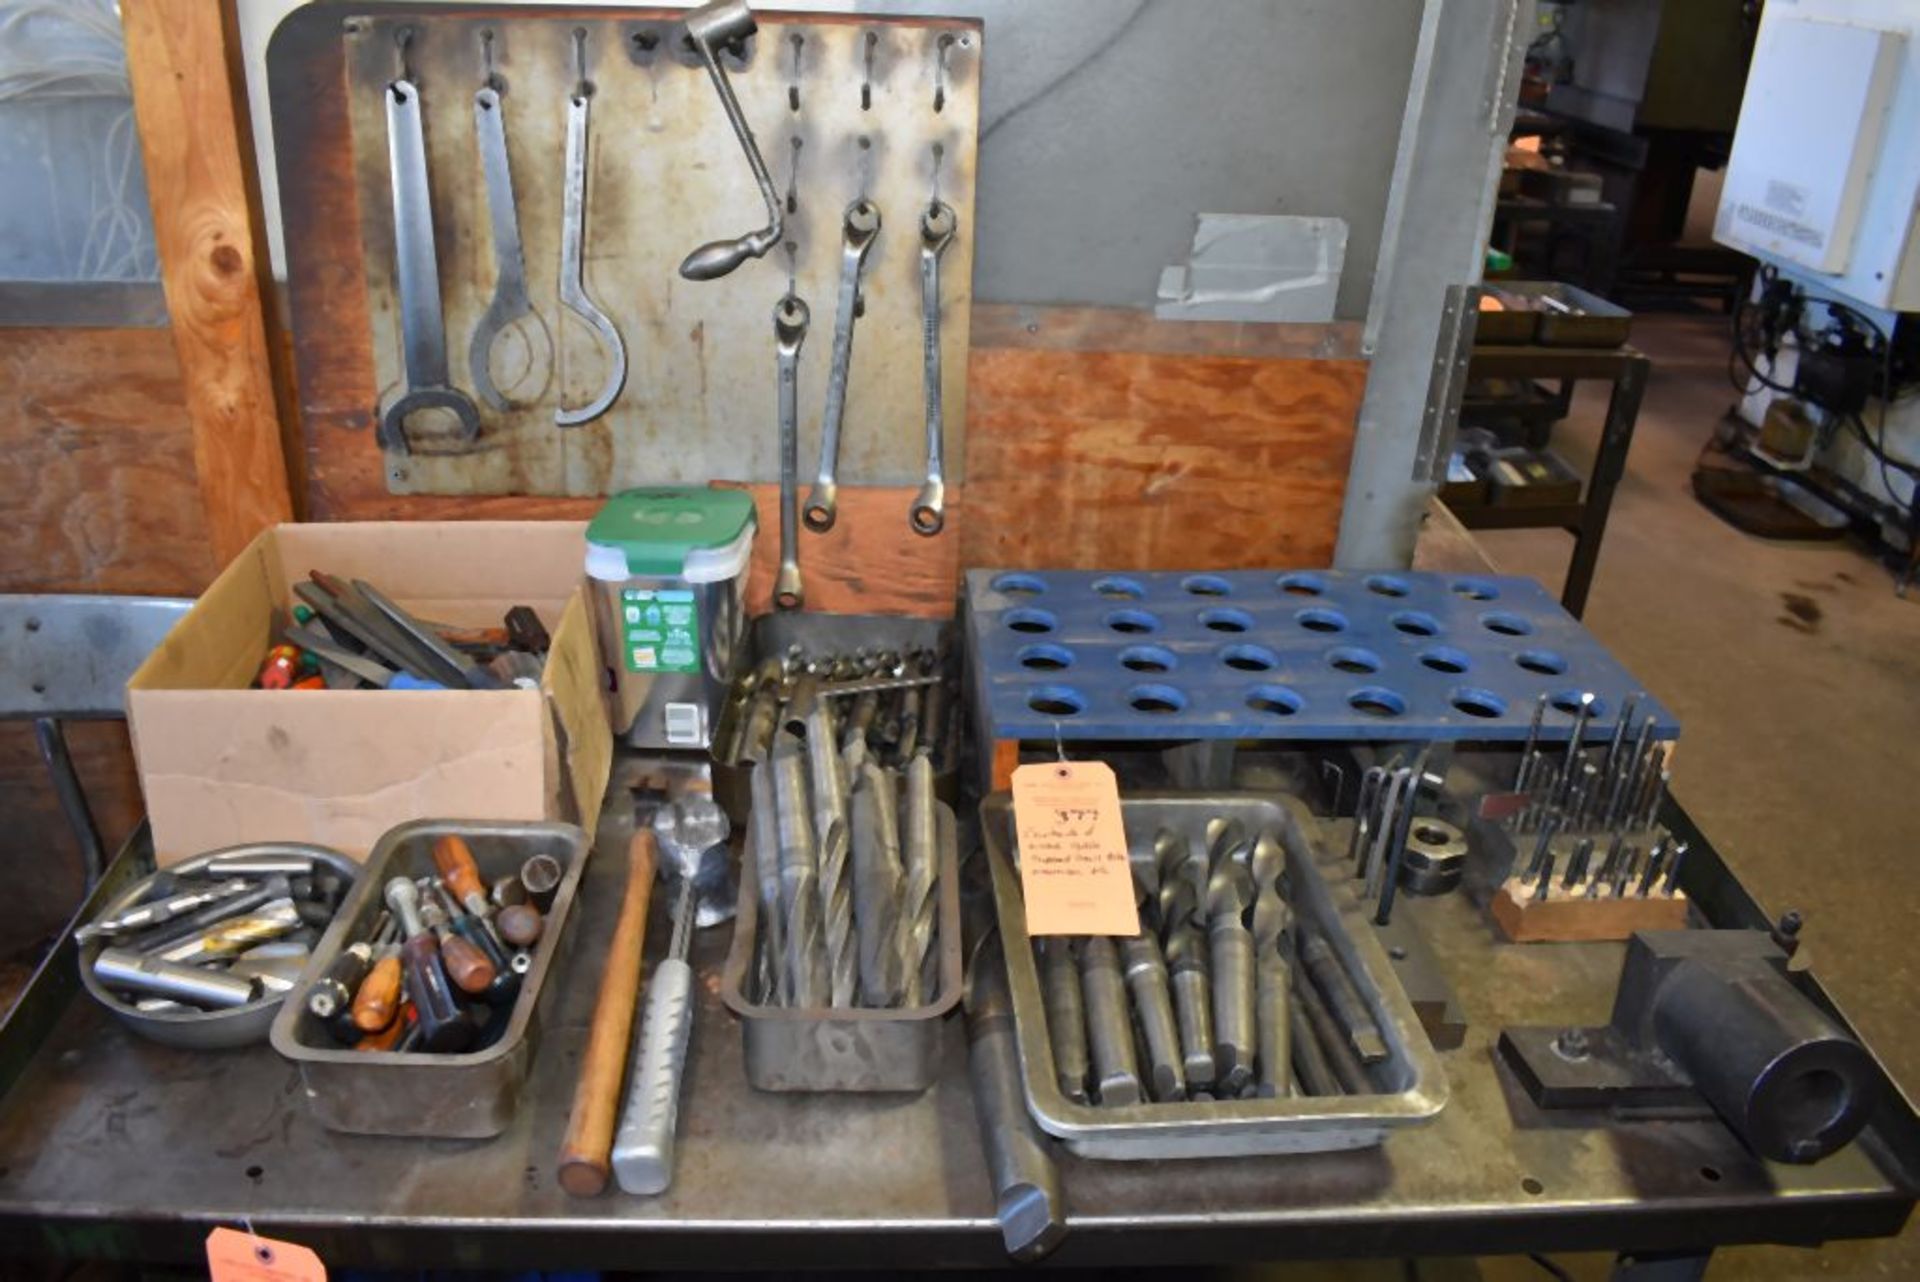 CONTENTS OF WORK TABLE, TAPERED DRILL BITS, WRENCHES, ETC.